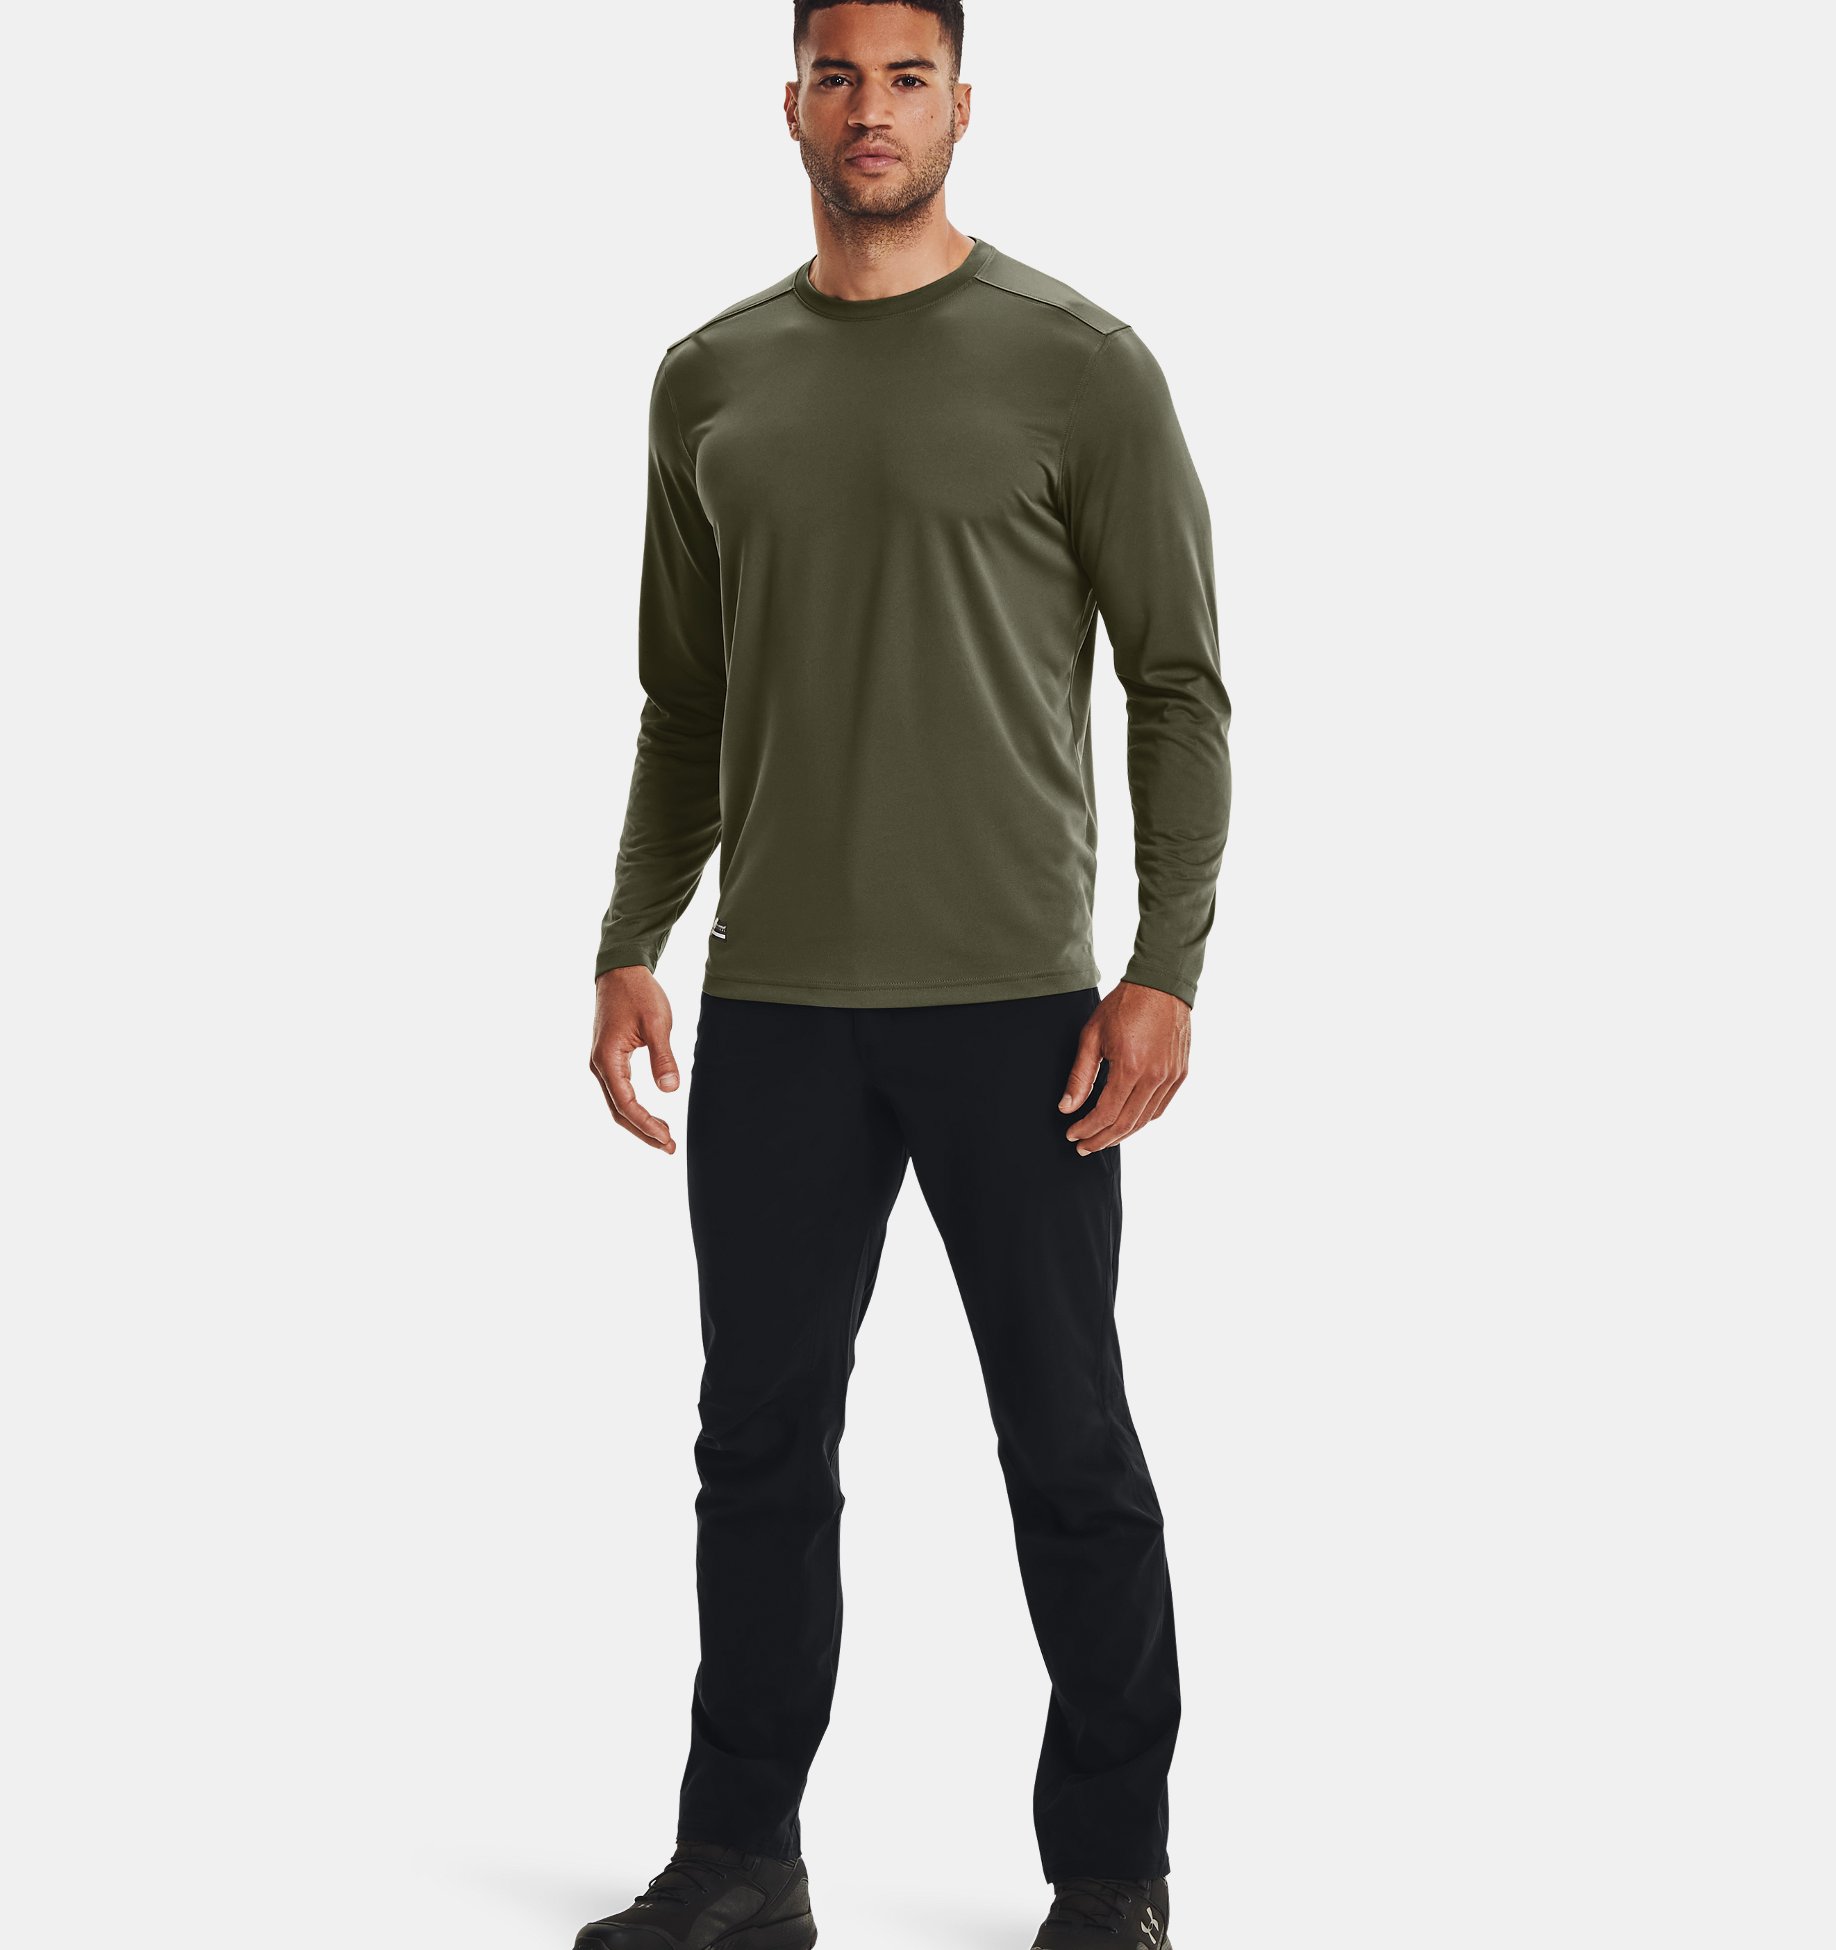 Gym Clothes with a Comfortable Fit UA TAC Tech Long Sleeve Tee Under Armour Mens Sports T-Shirt Made with Anti-Odour Technology 